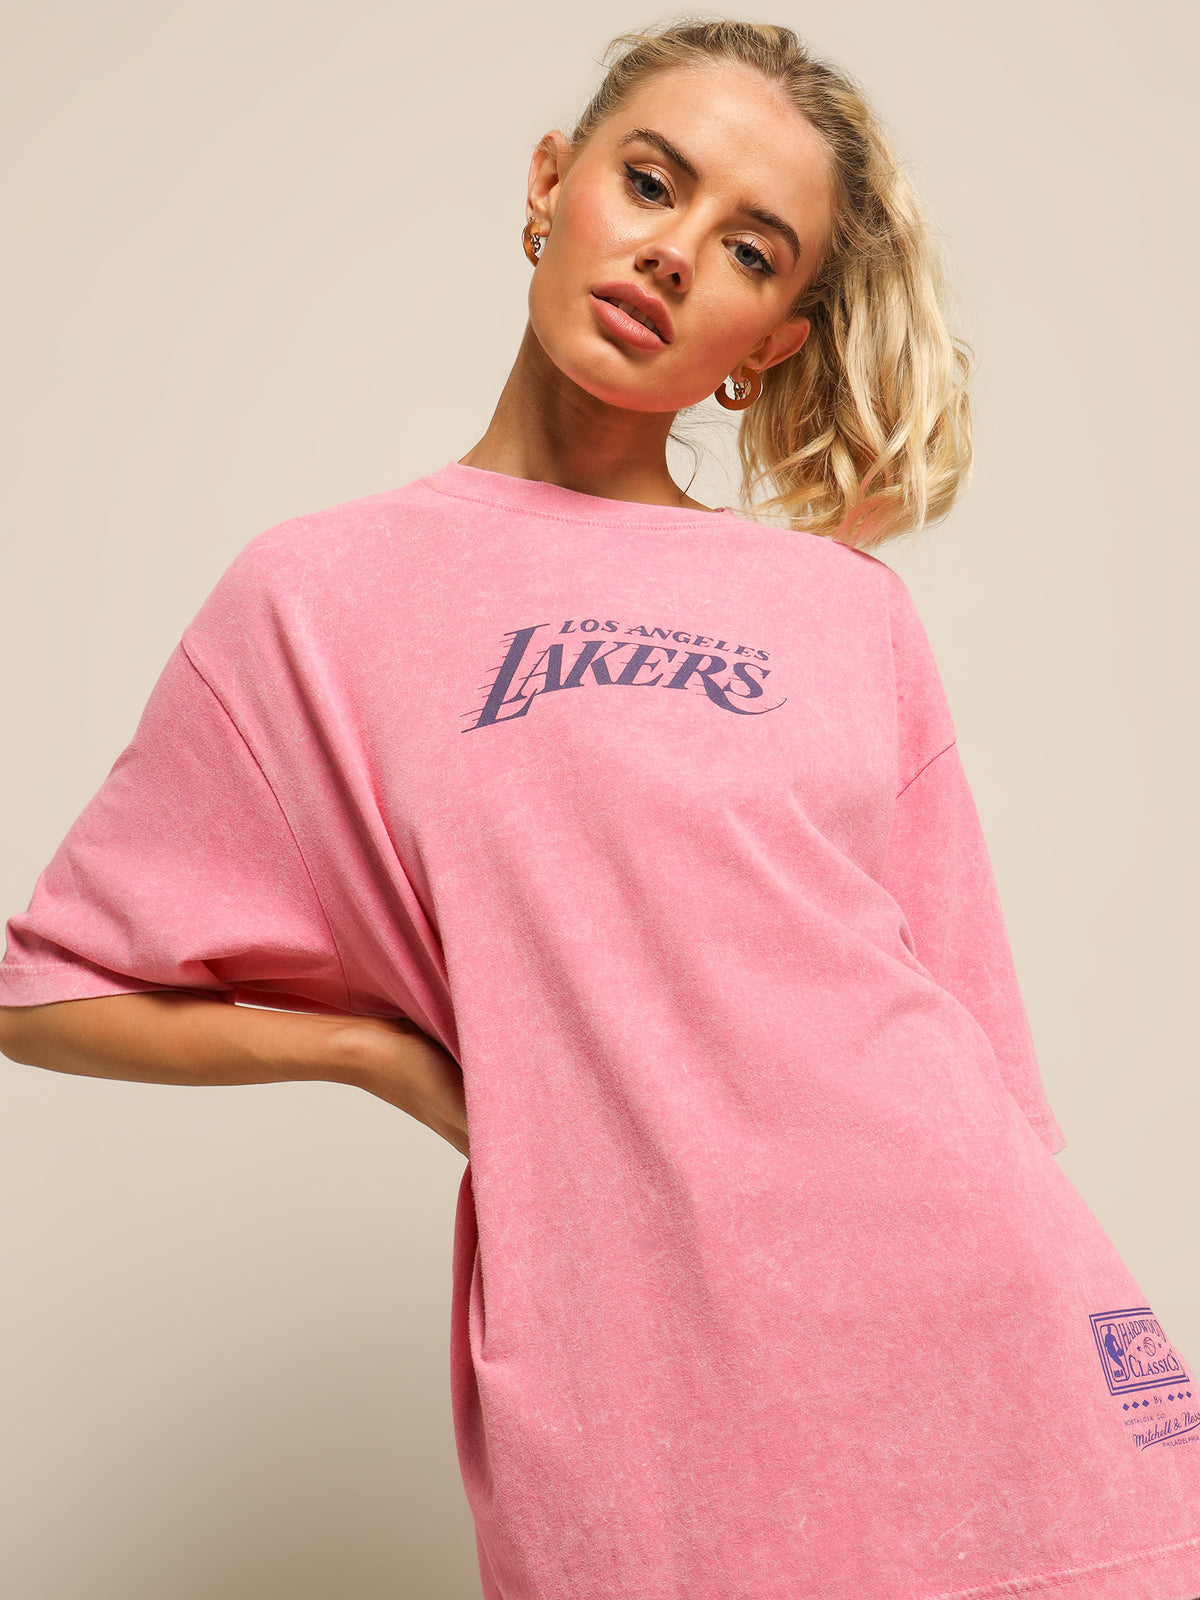 Old School 1987 Lakers T-Shirt in Rose